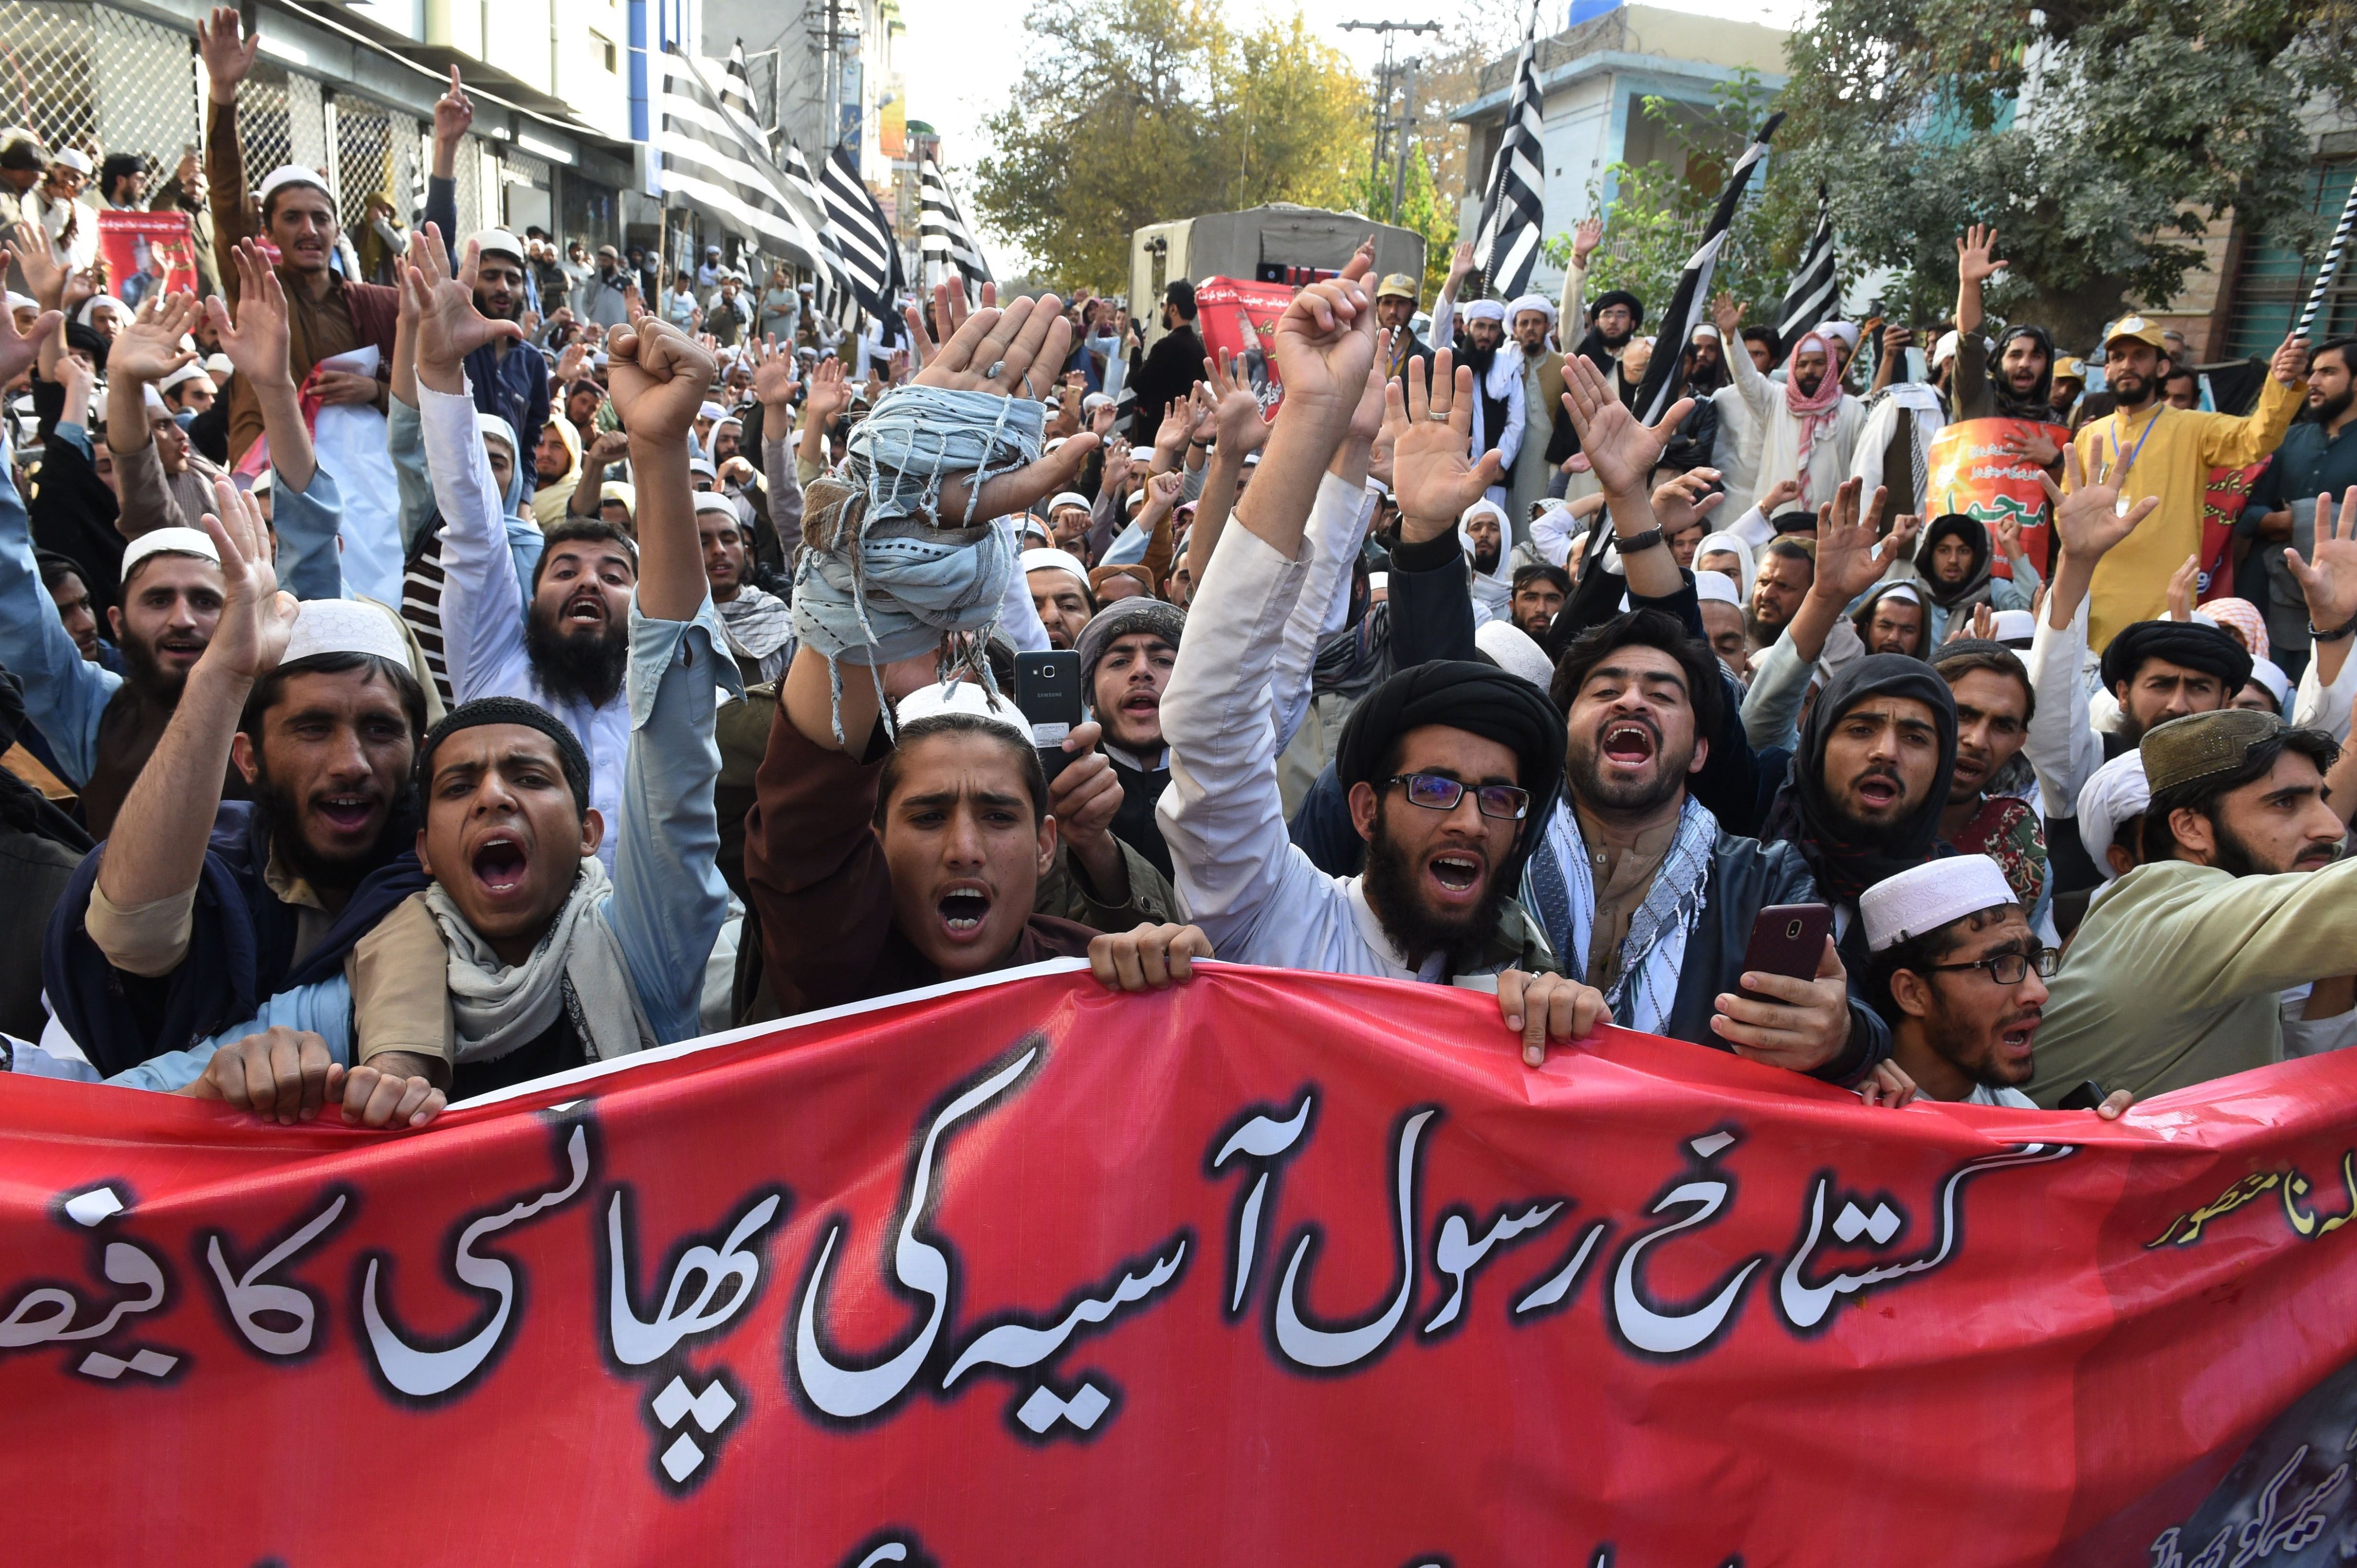 Pakistani supporters of Jamiat Ulema-e-Islam-Fazl, a hardline religious political party, protest following the Supreme Court decision to acquit Christian woman Asia Bibi, in Quetta on Nov. 1, 2018. (Banaras Khan—AFP/Getty Images)